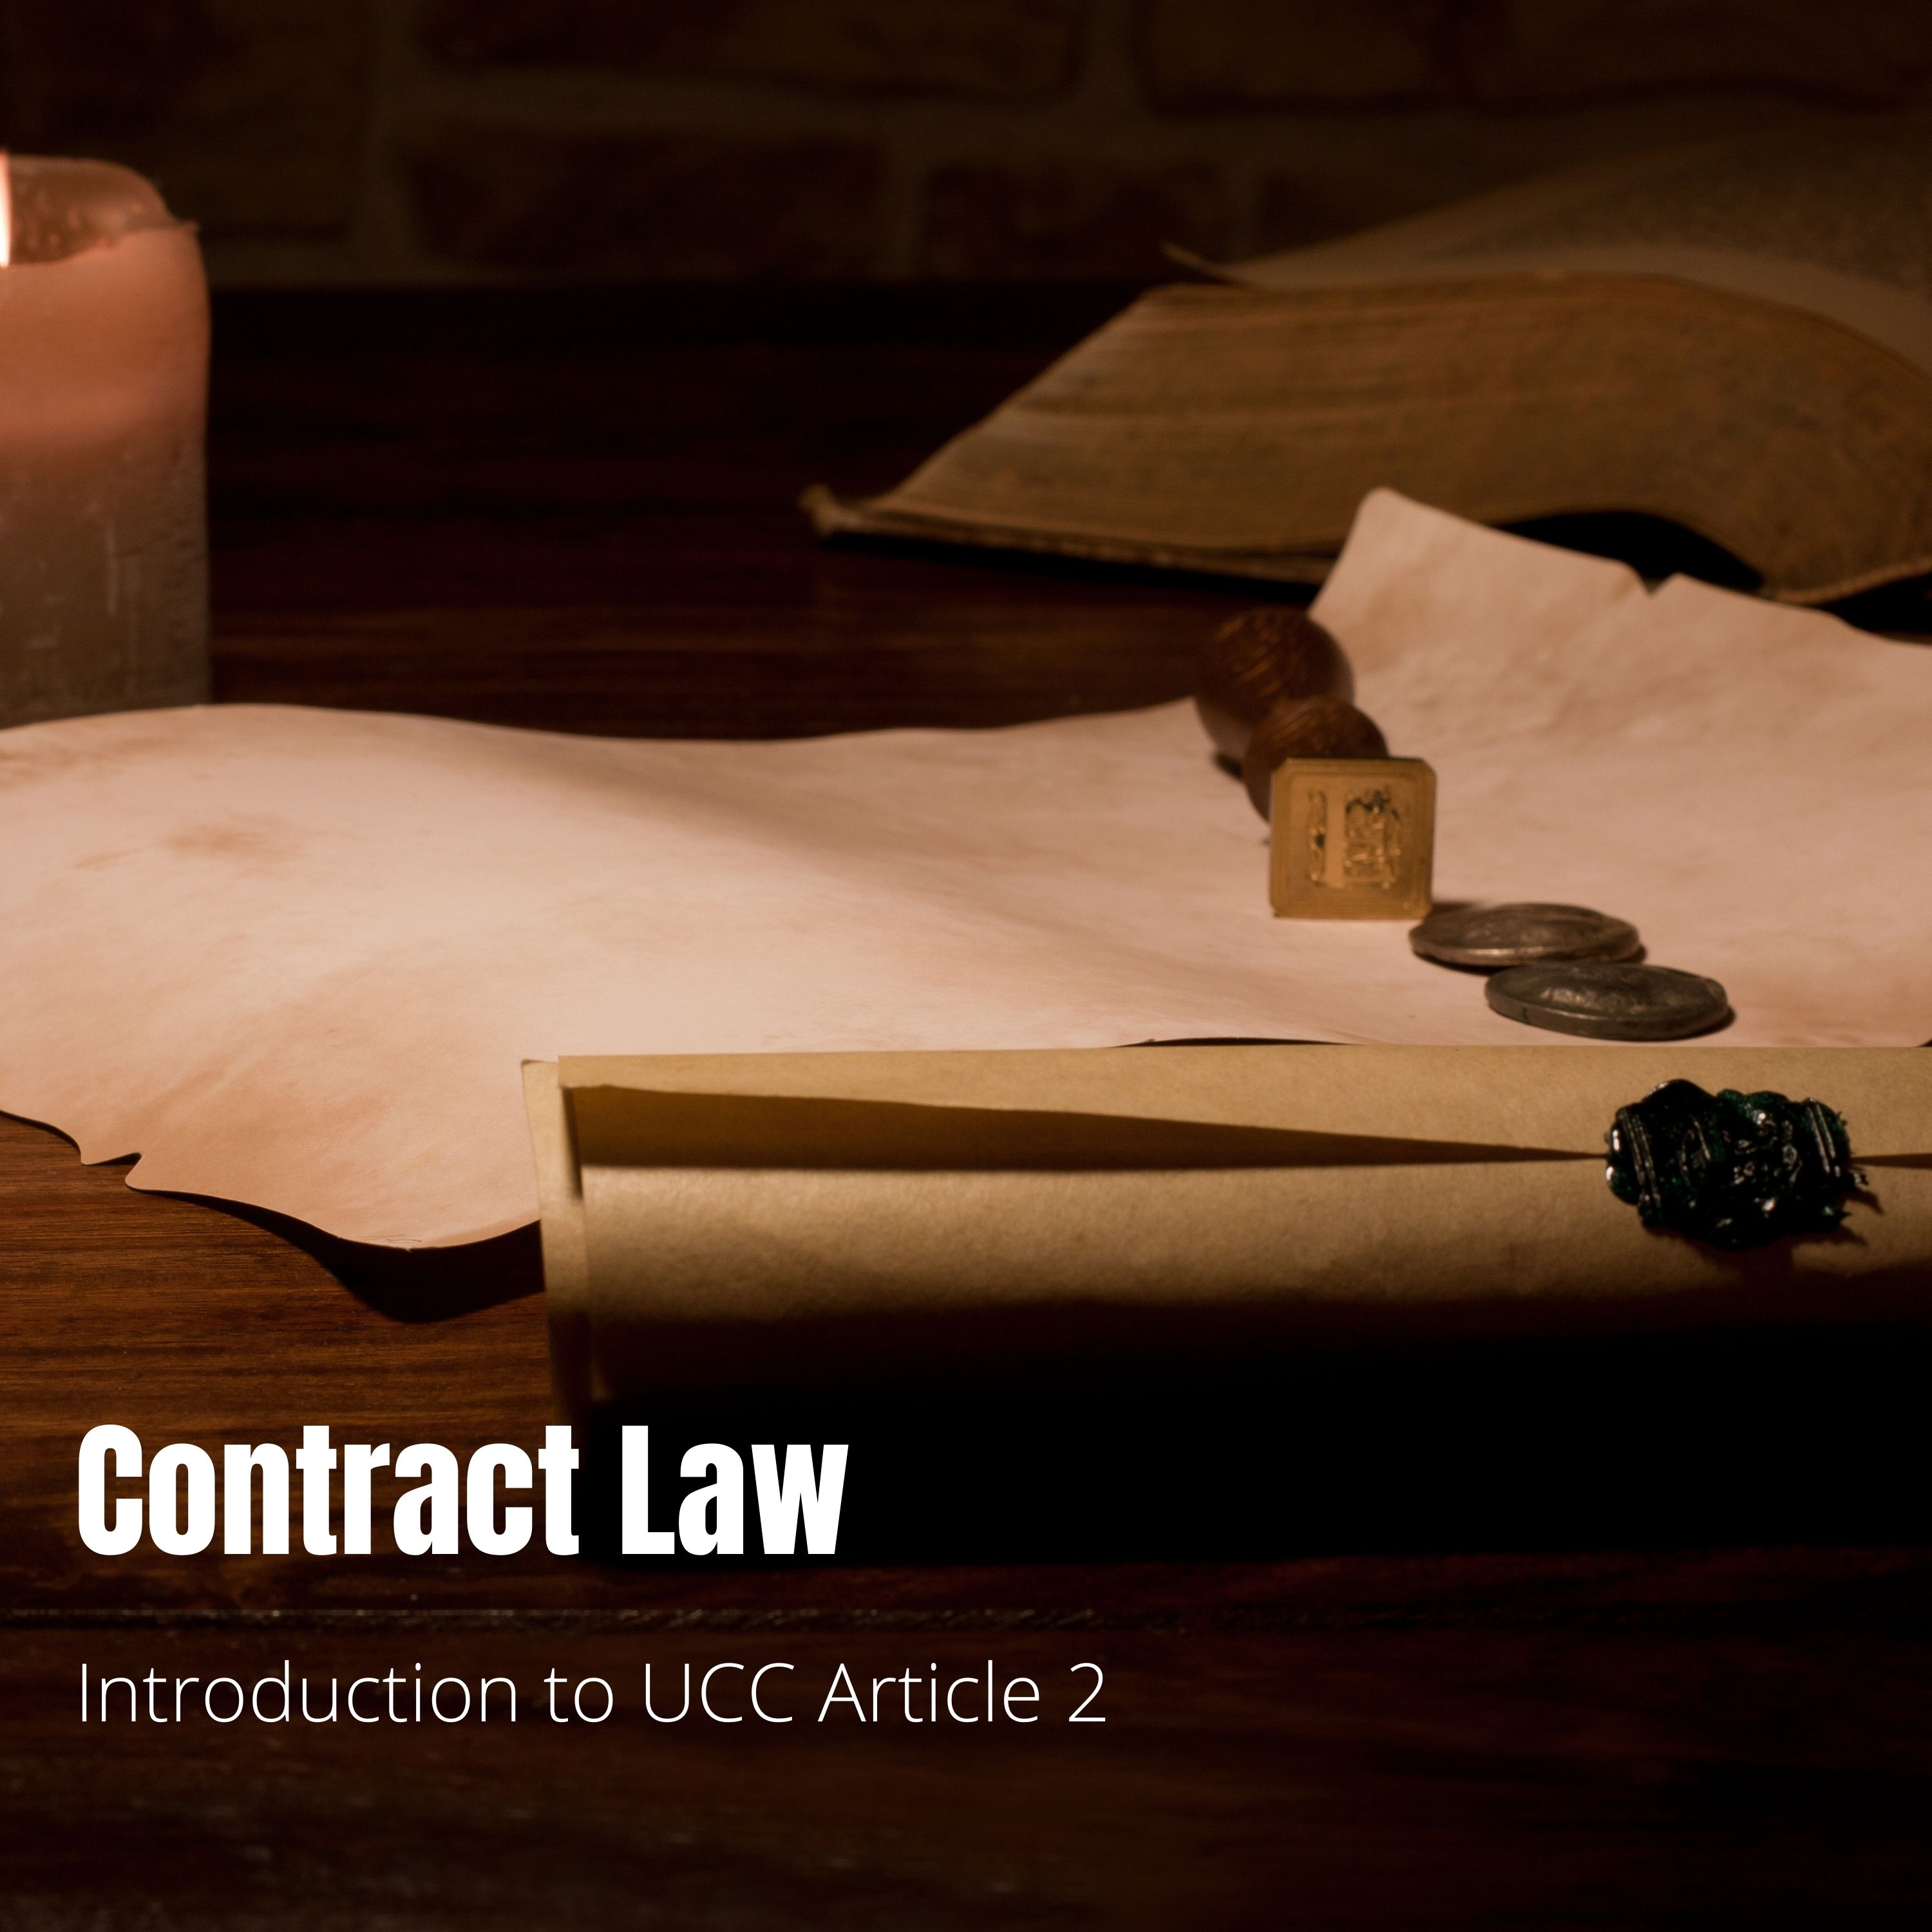 Contract Law - Lecture 1: Introduction to UCC Article 2